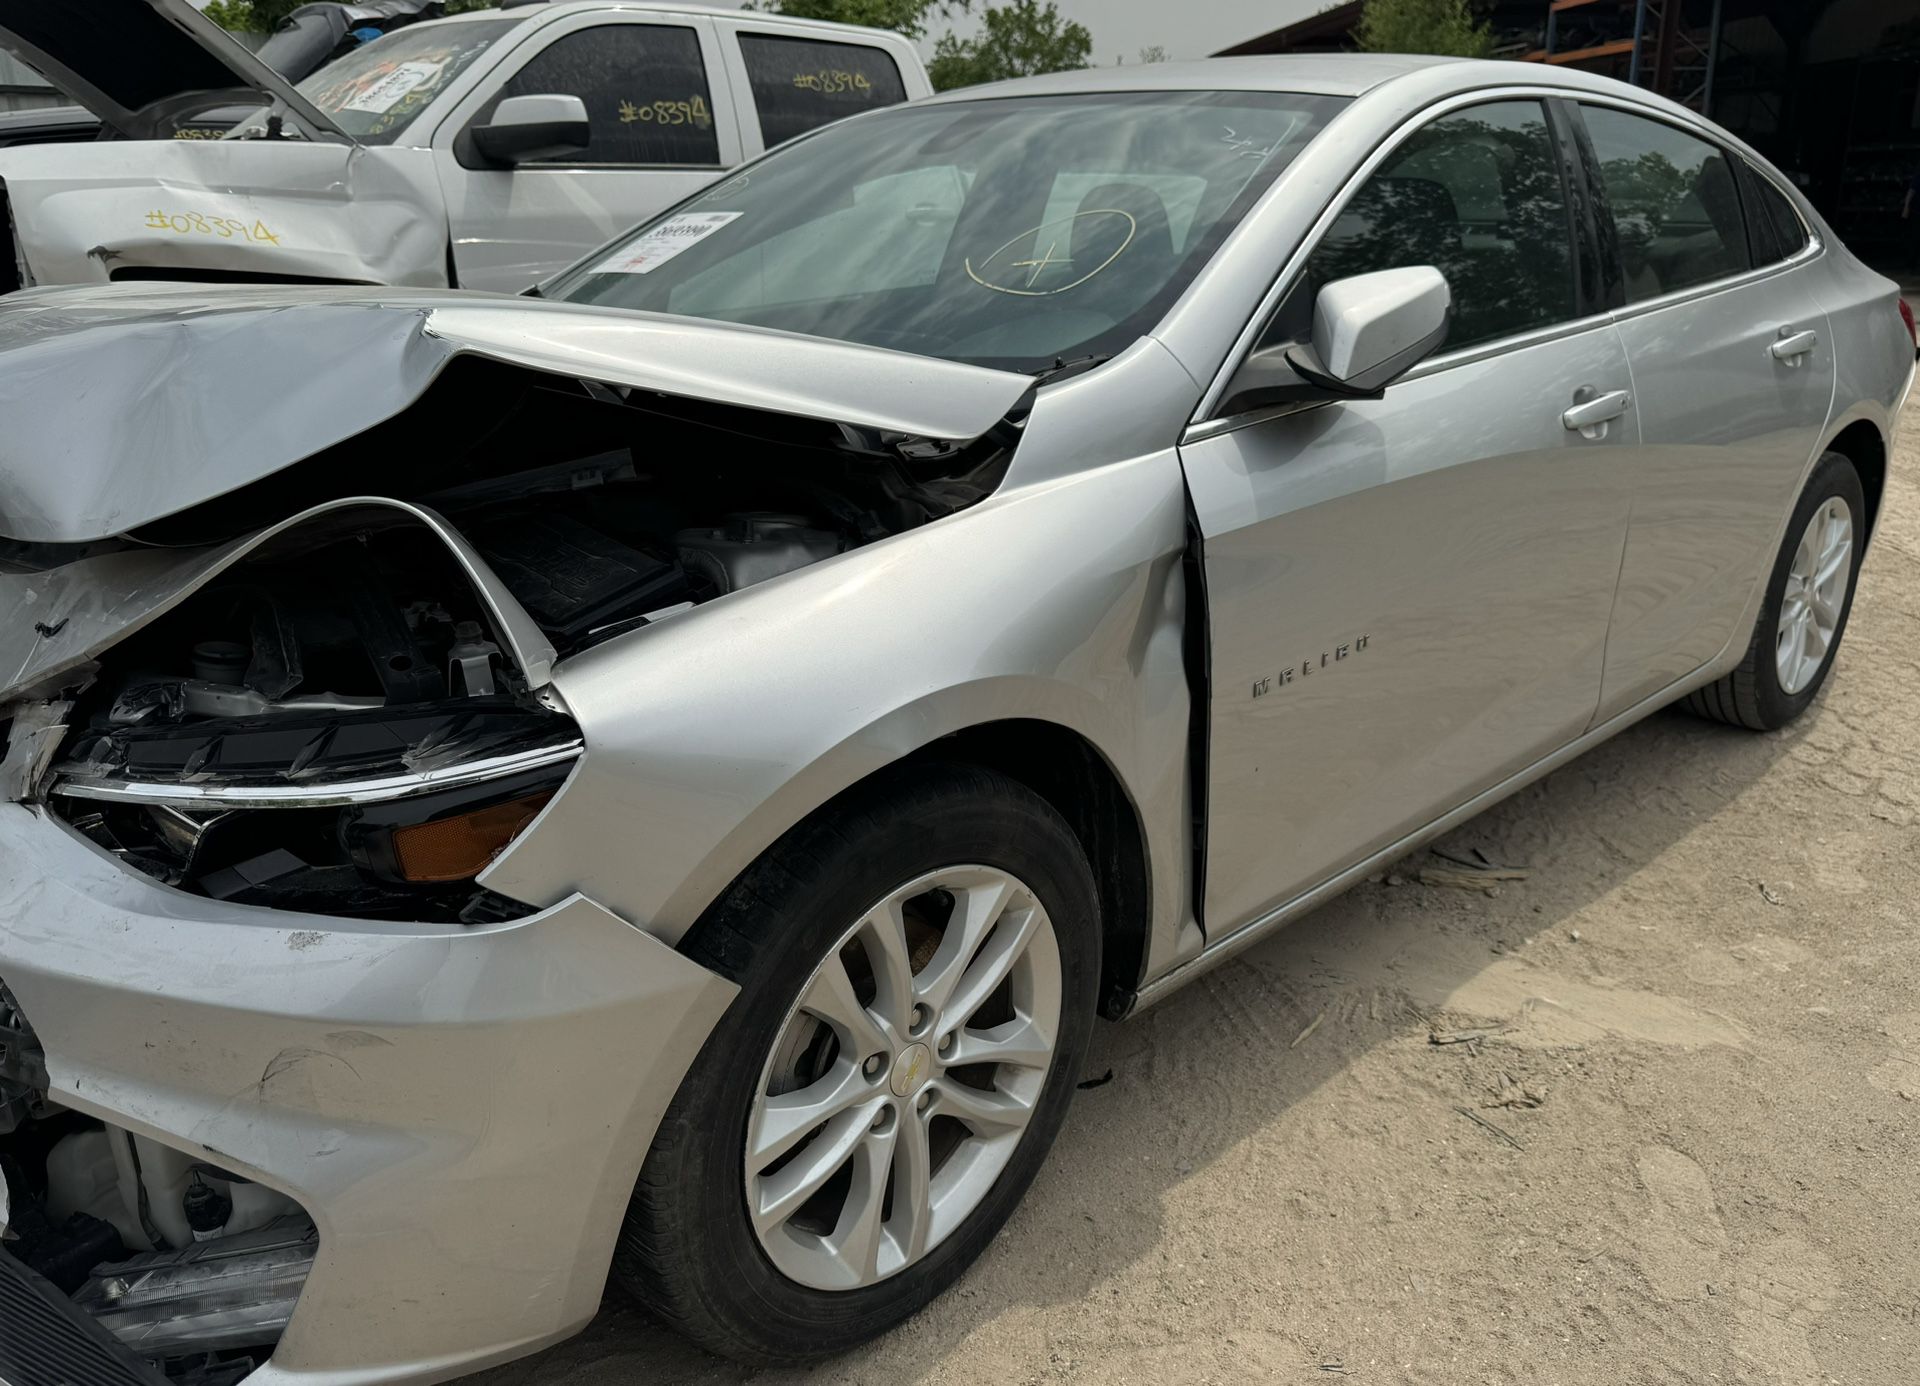 2018 CHEVY MALIBU 1.5L (PARTS ONLY)